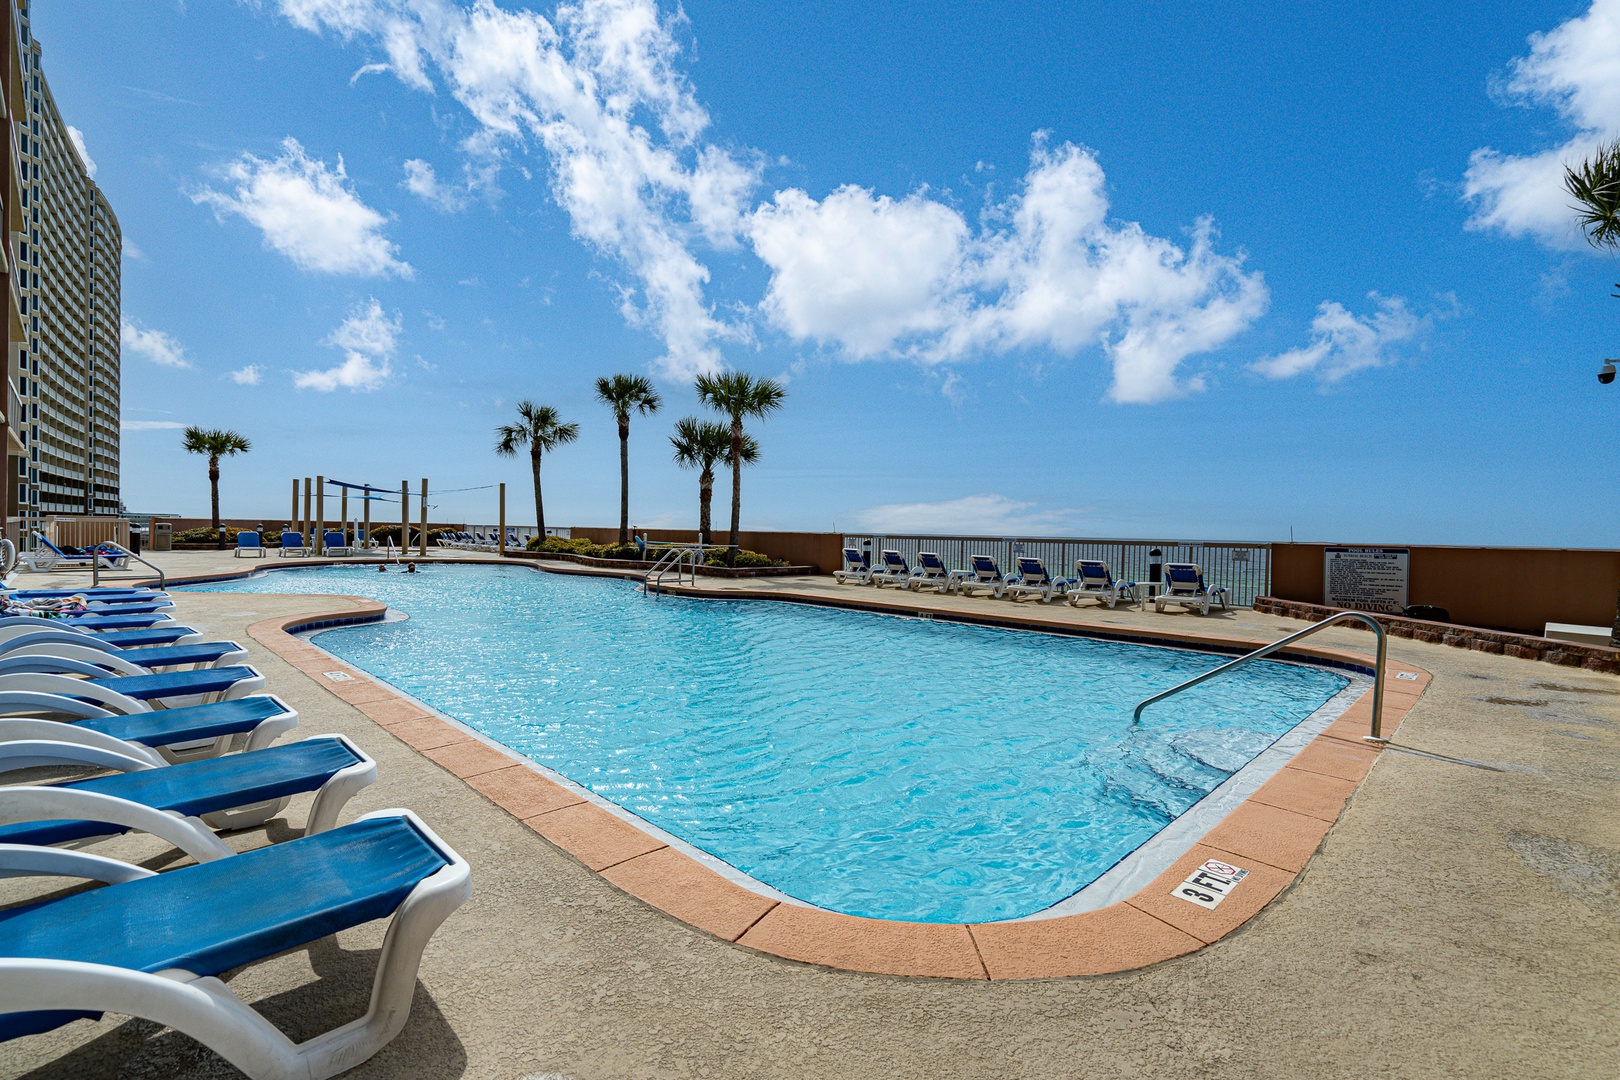 Lounge the day away or make a splash at the sparkling community pool